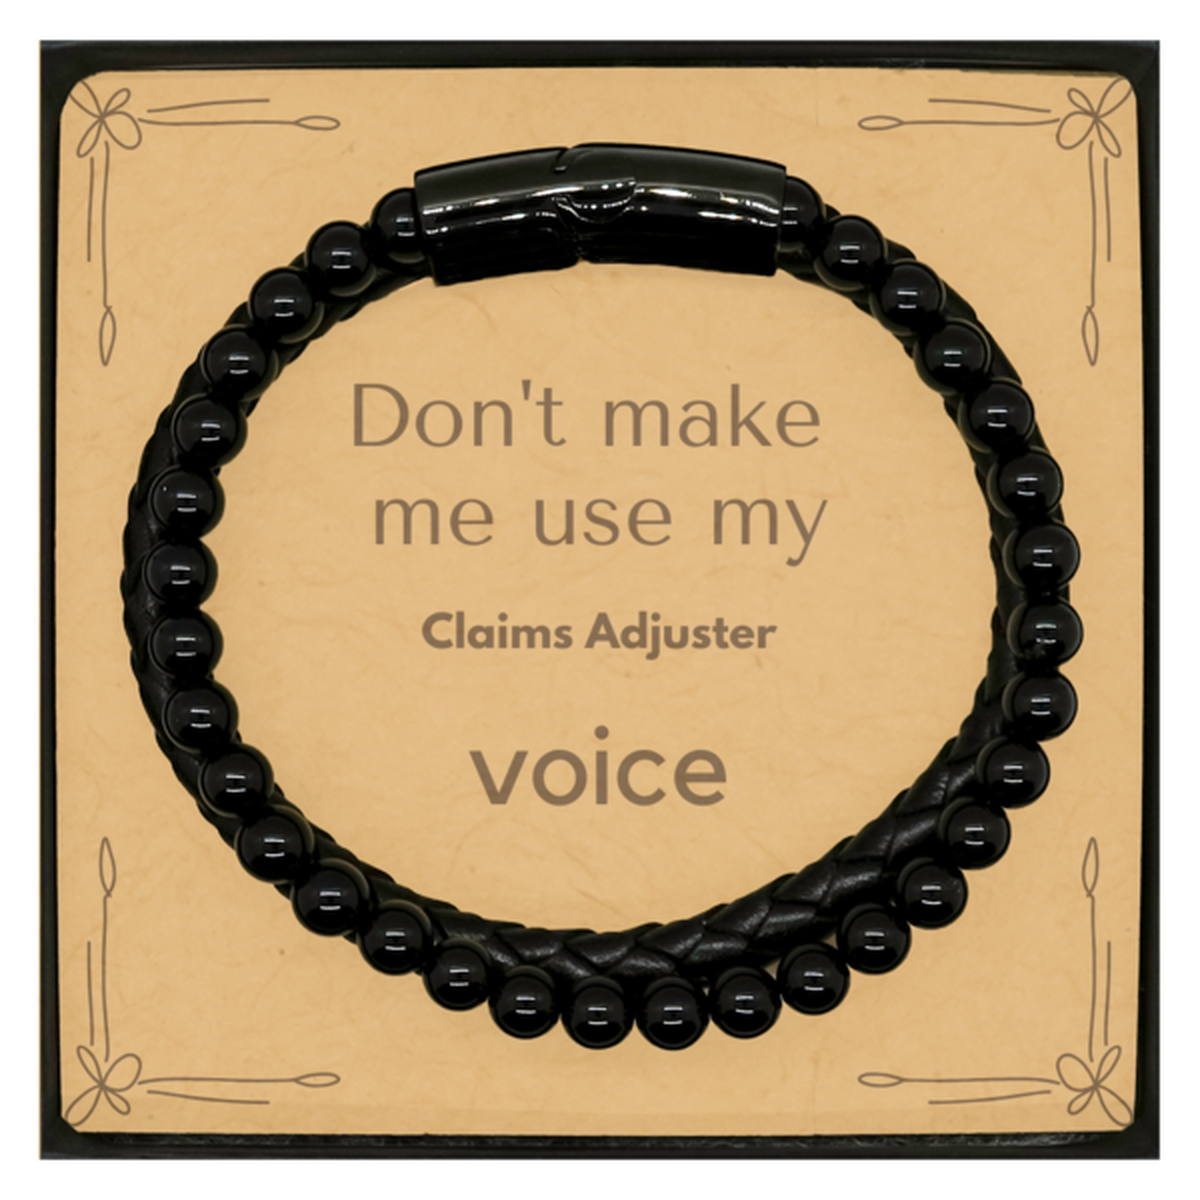 Don't make me use my Claims Adjuster voice, Sarcasm Claims Adjuster Card Gifts, Christmas Claims Adjuster Stone Leather Bracelets Birthday Unique Gifts For Claims Adjuster Coworkers, Men, Women, Colleague, Friends